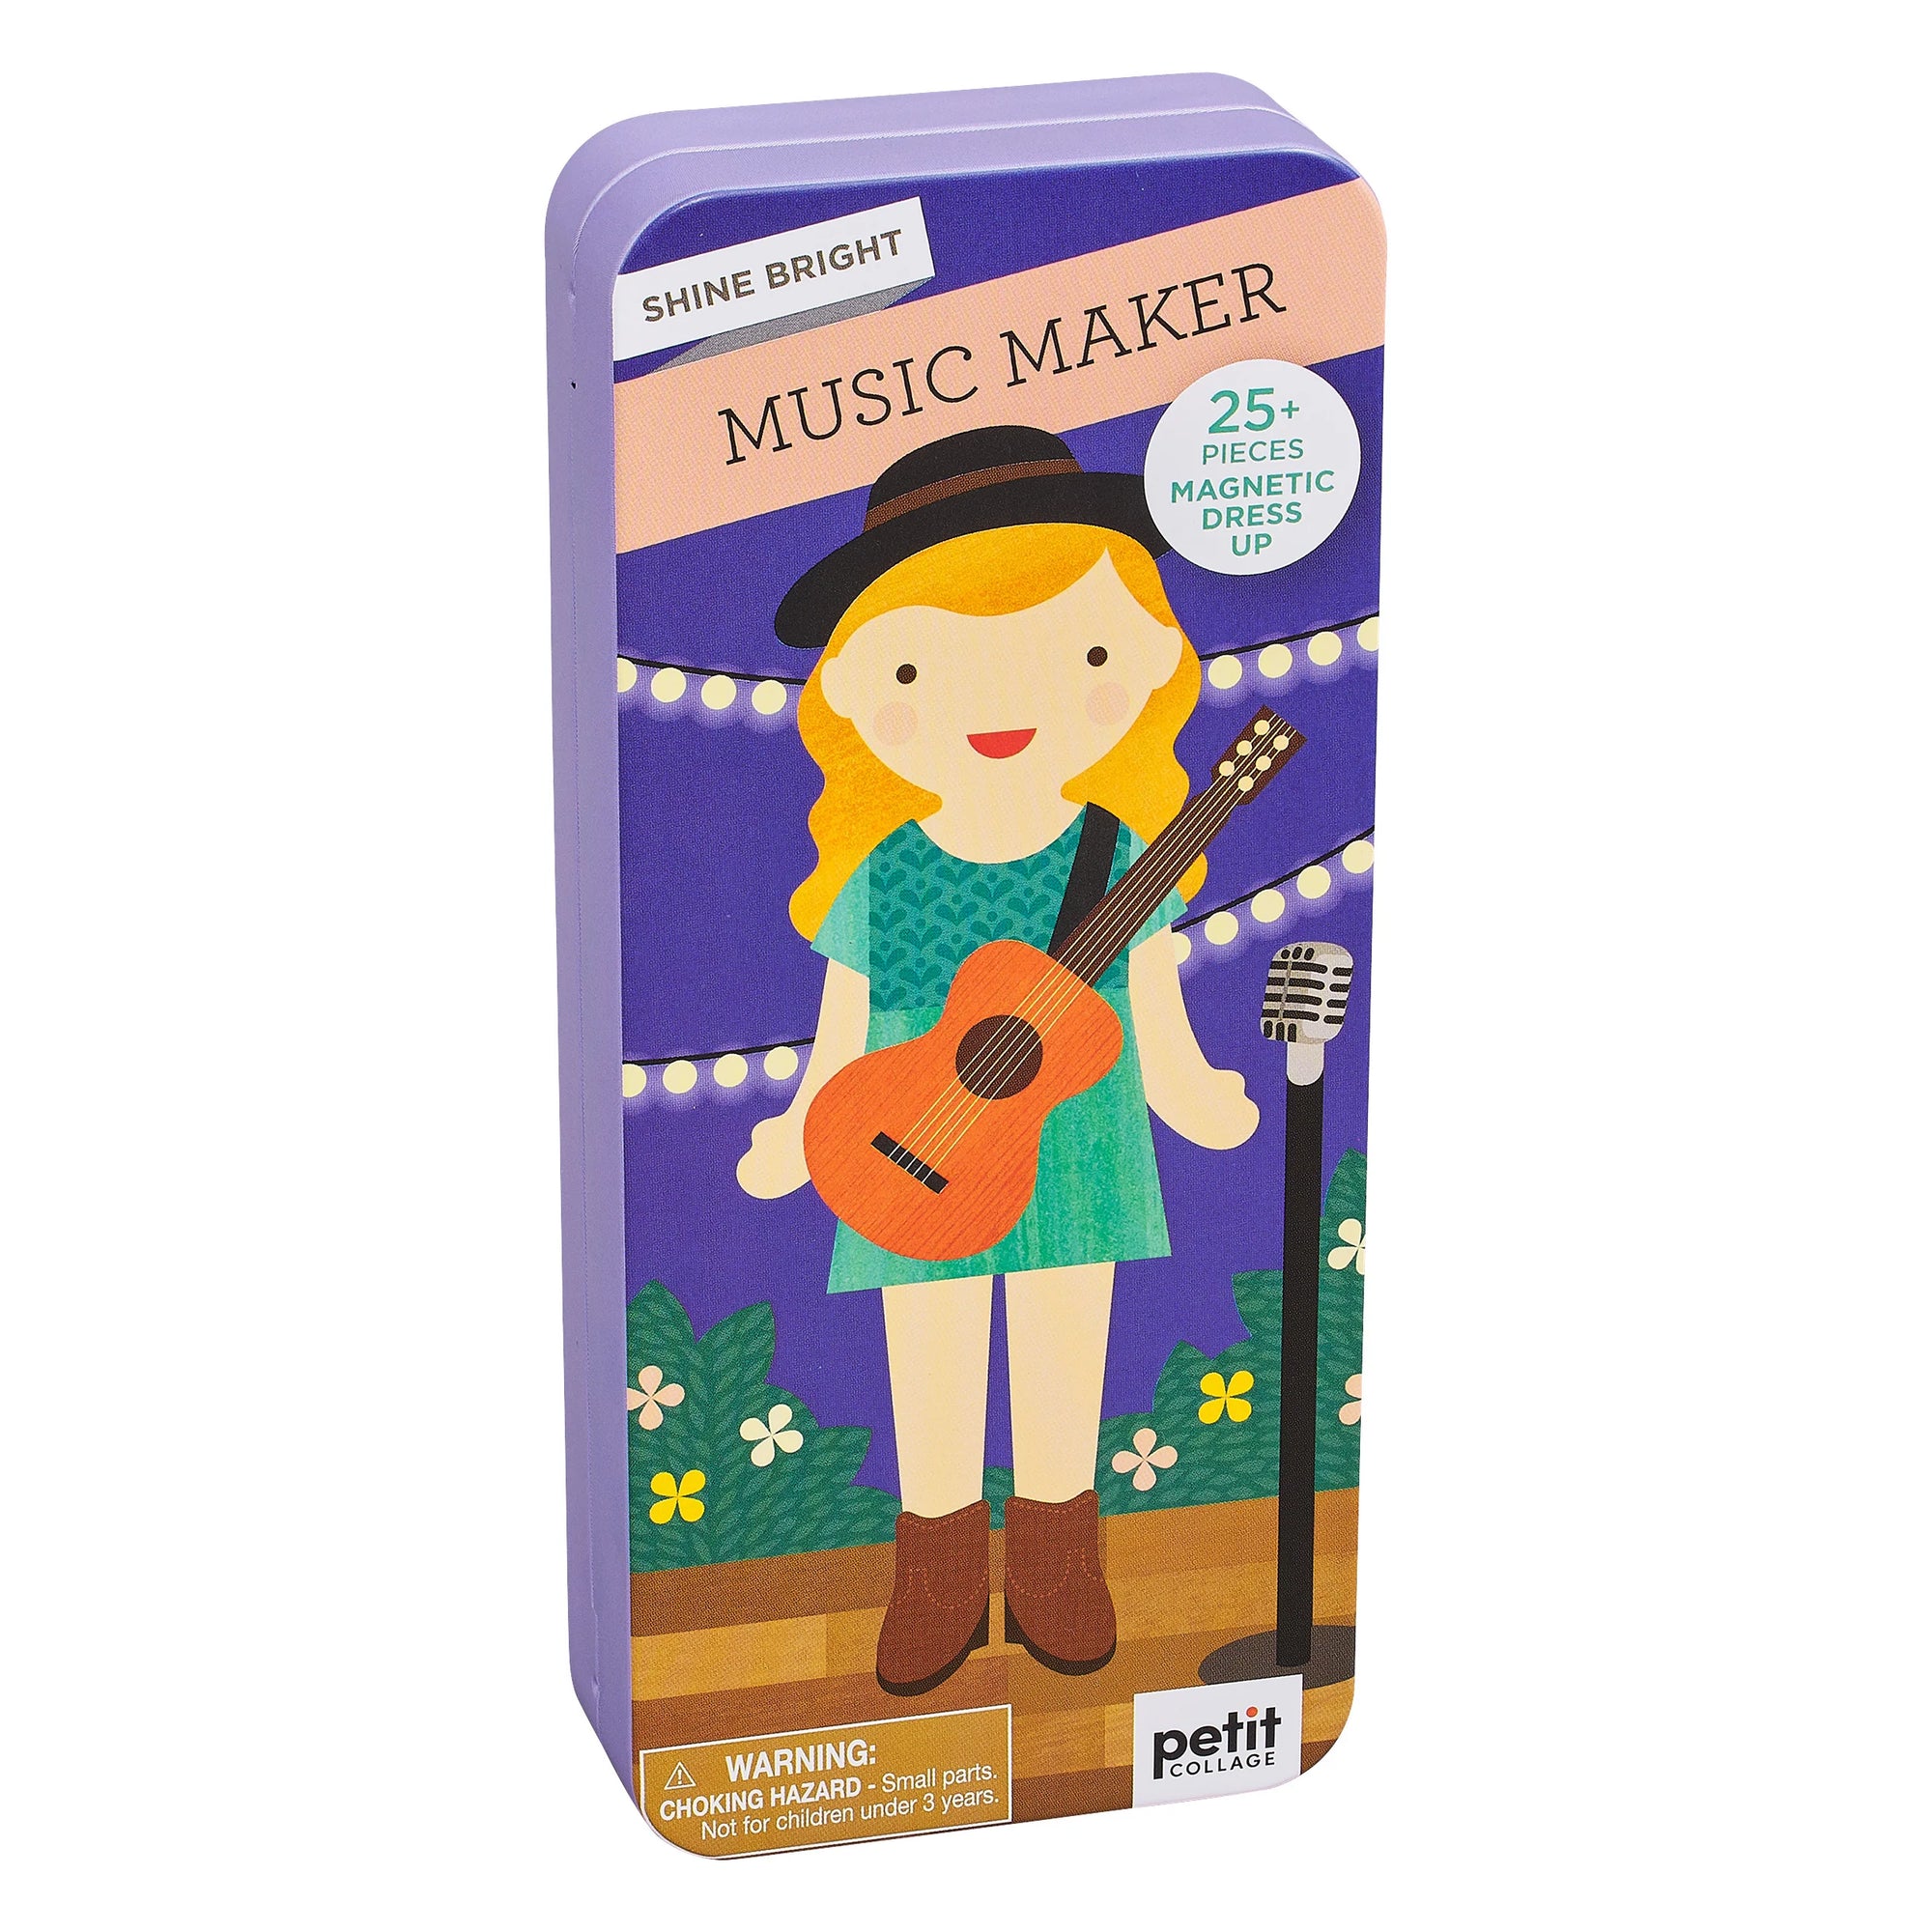 Petit Collage Magnetic Dress Up: Shine Bright Music Maker